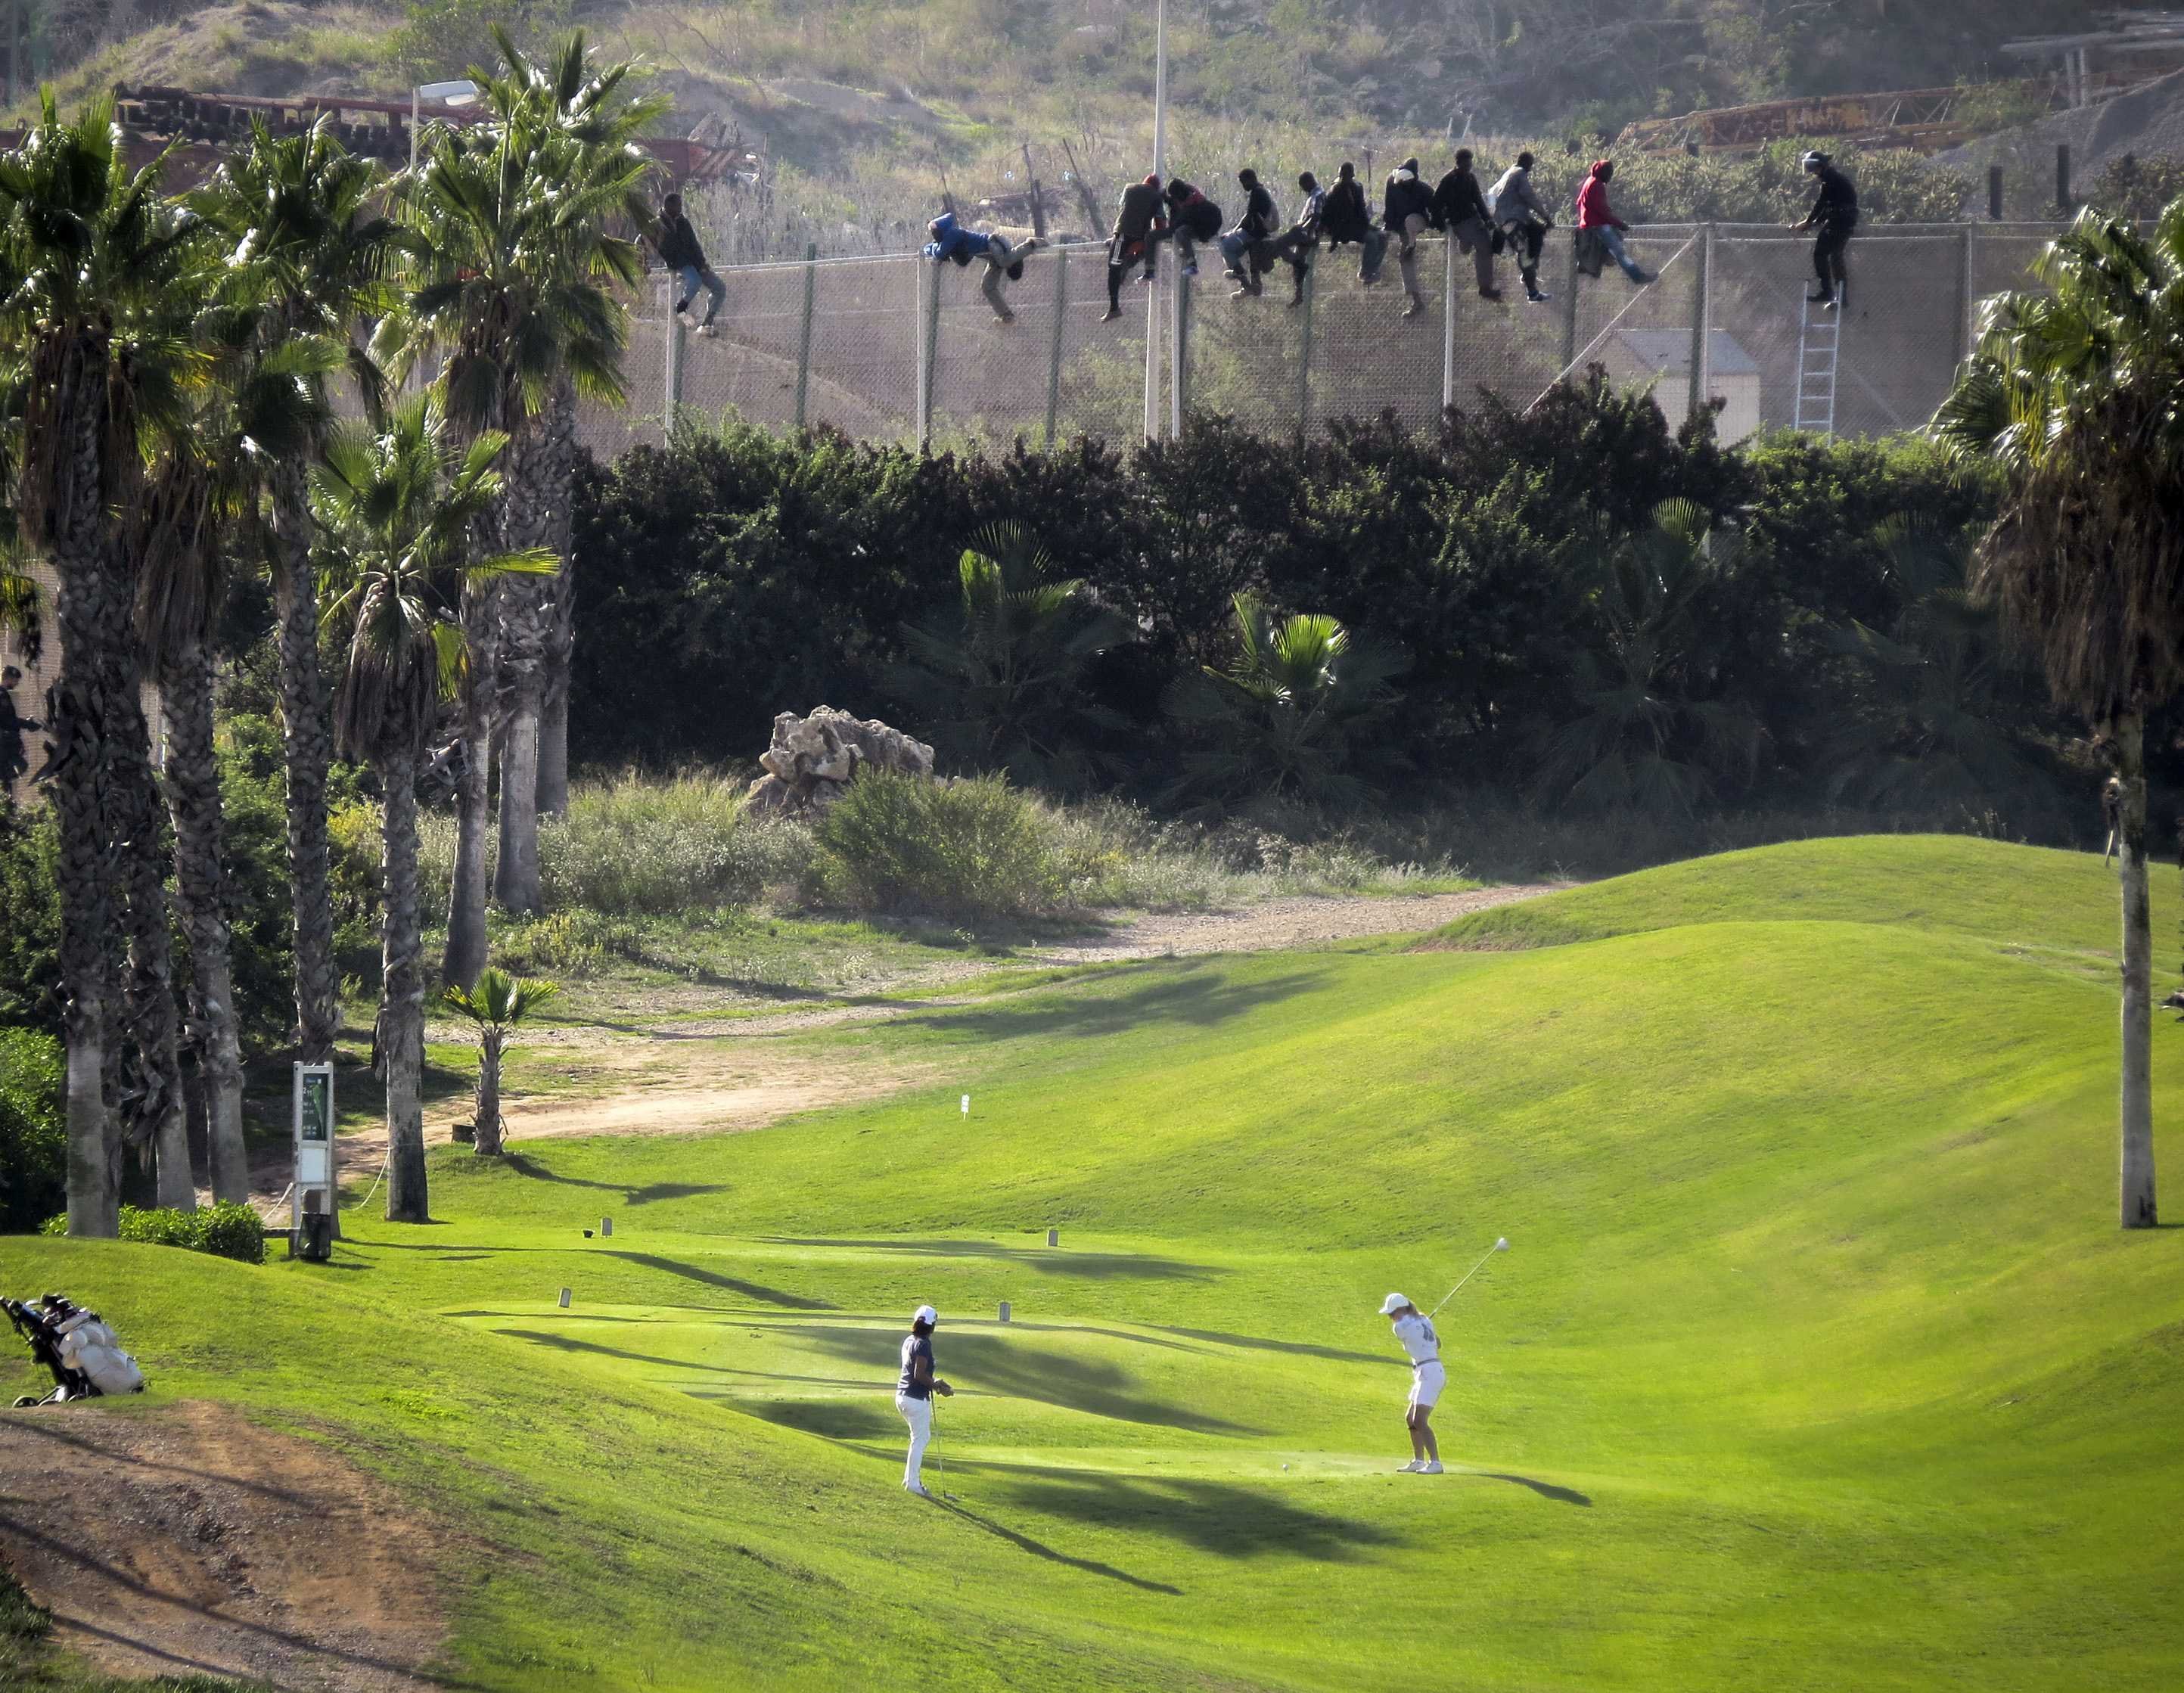 A golfer swings as African migrants sit atop a fence during an attempt to cross from Morocco into the Spanish enclave of Melilla on Oct. 22, 2014. (José Palazón—Reuters)